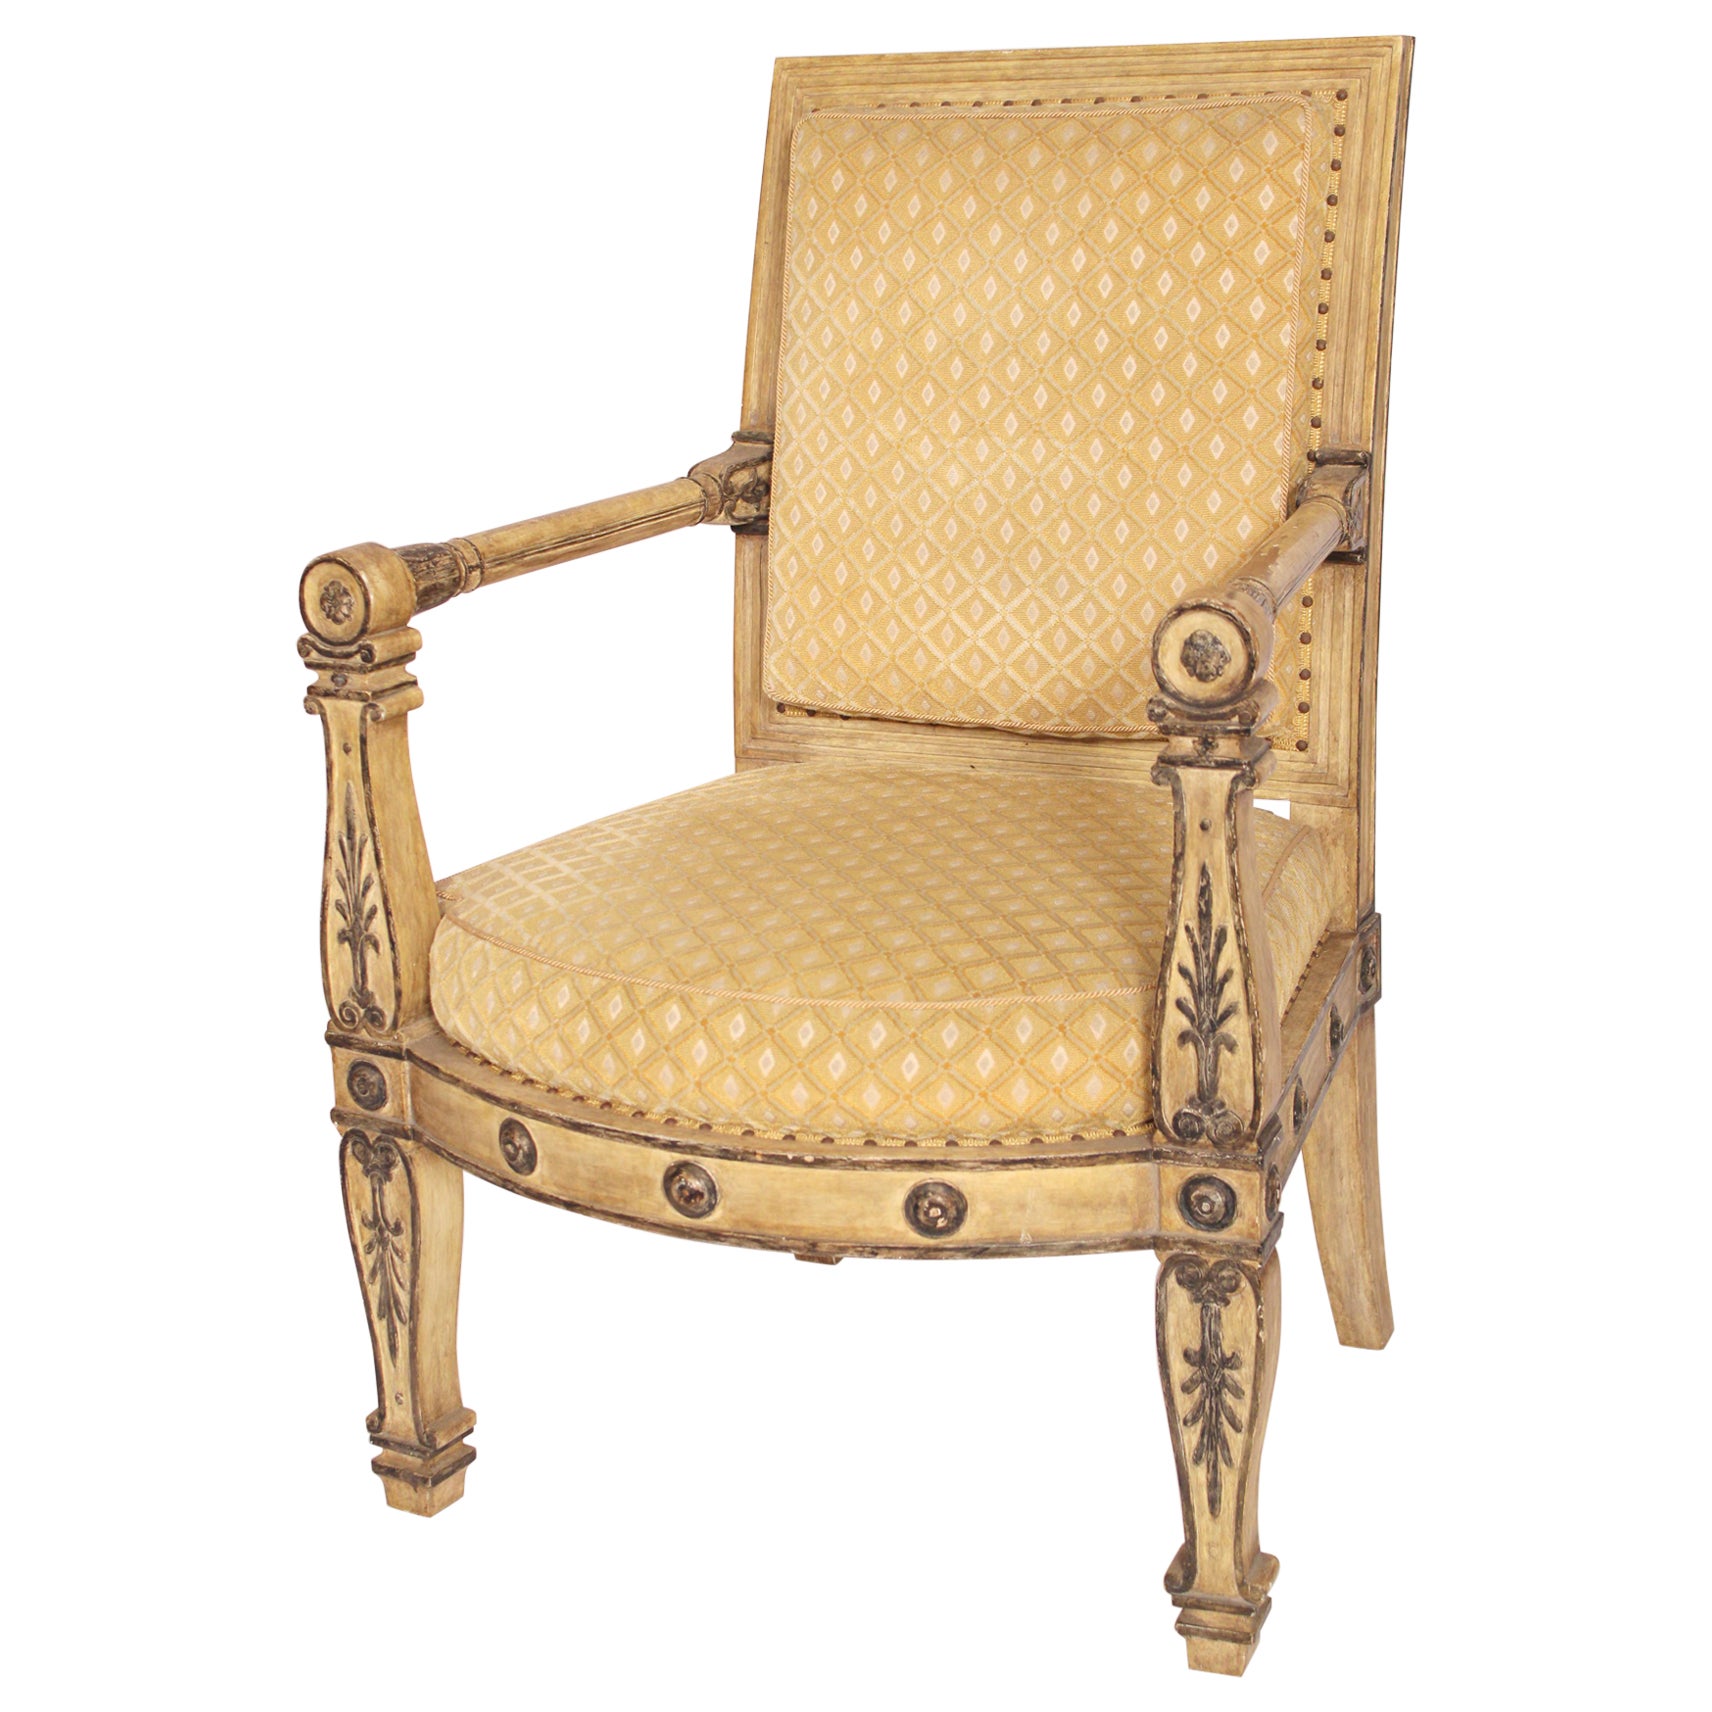 Henbdrix And Allardyce Painted Empire Style Armchair  For Sale